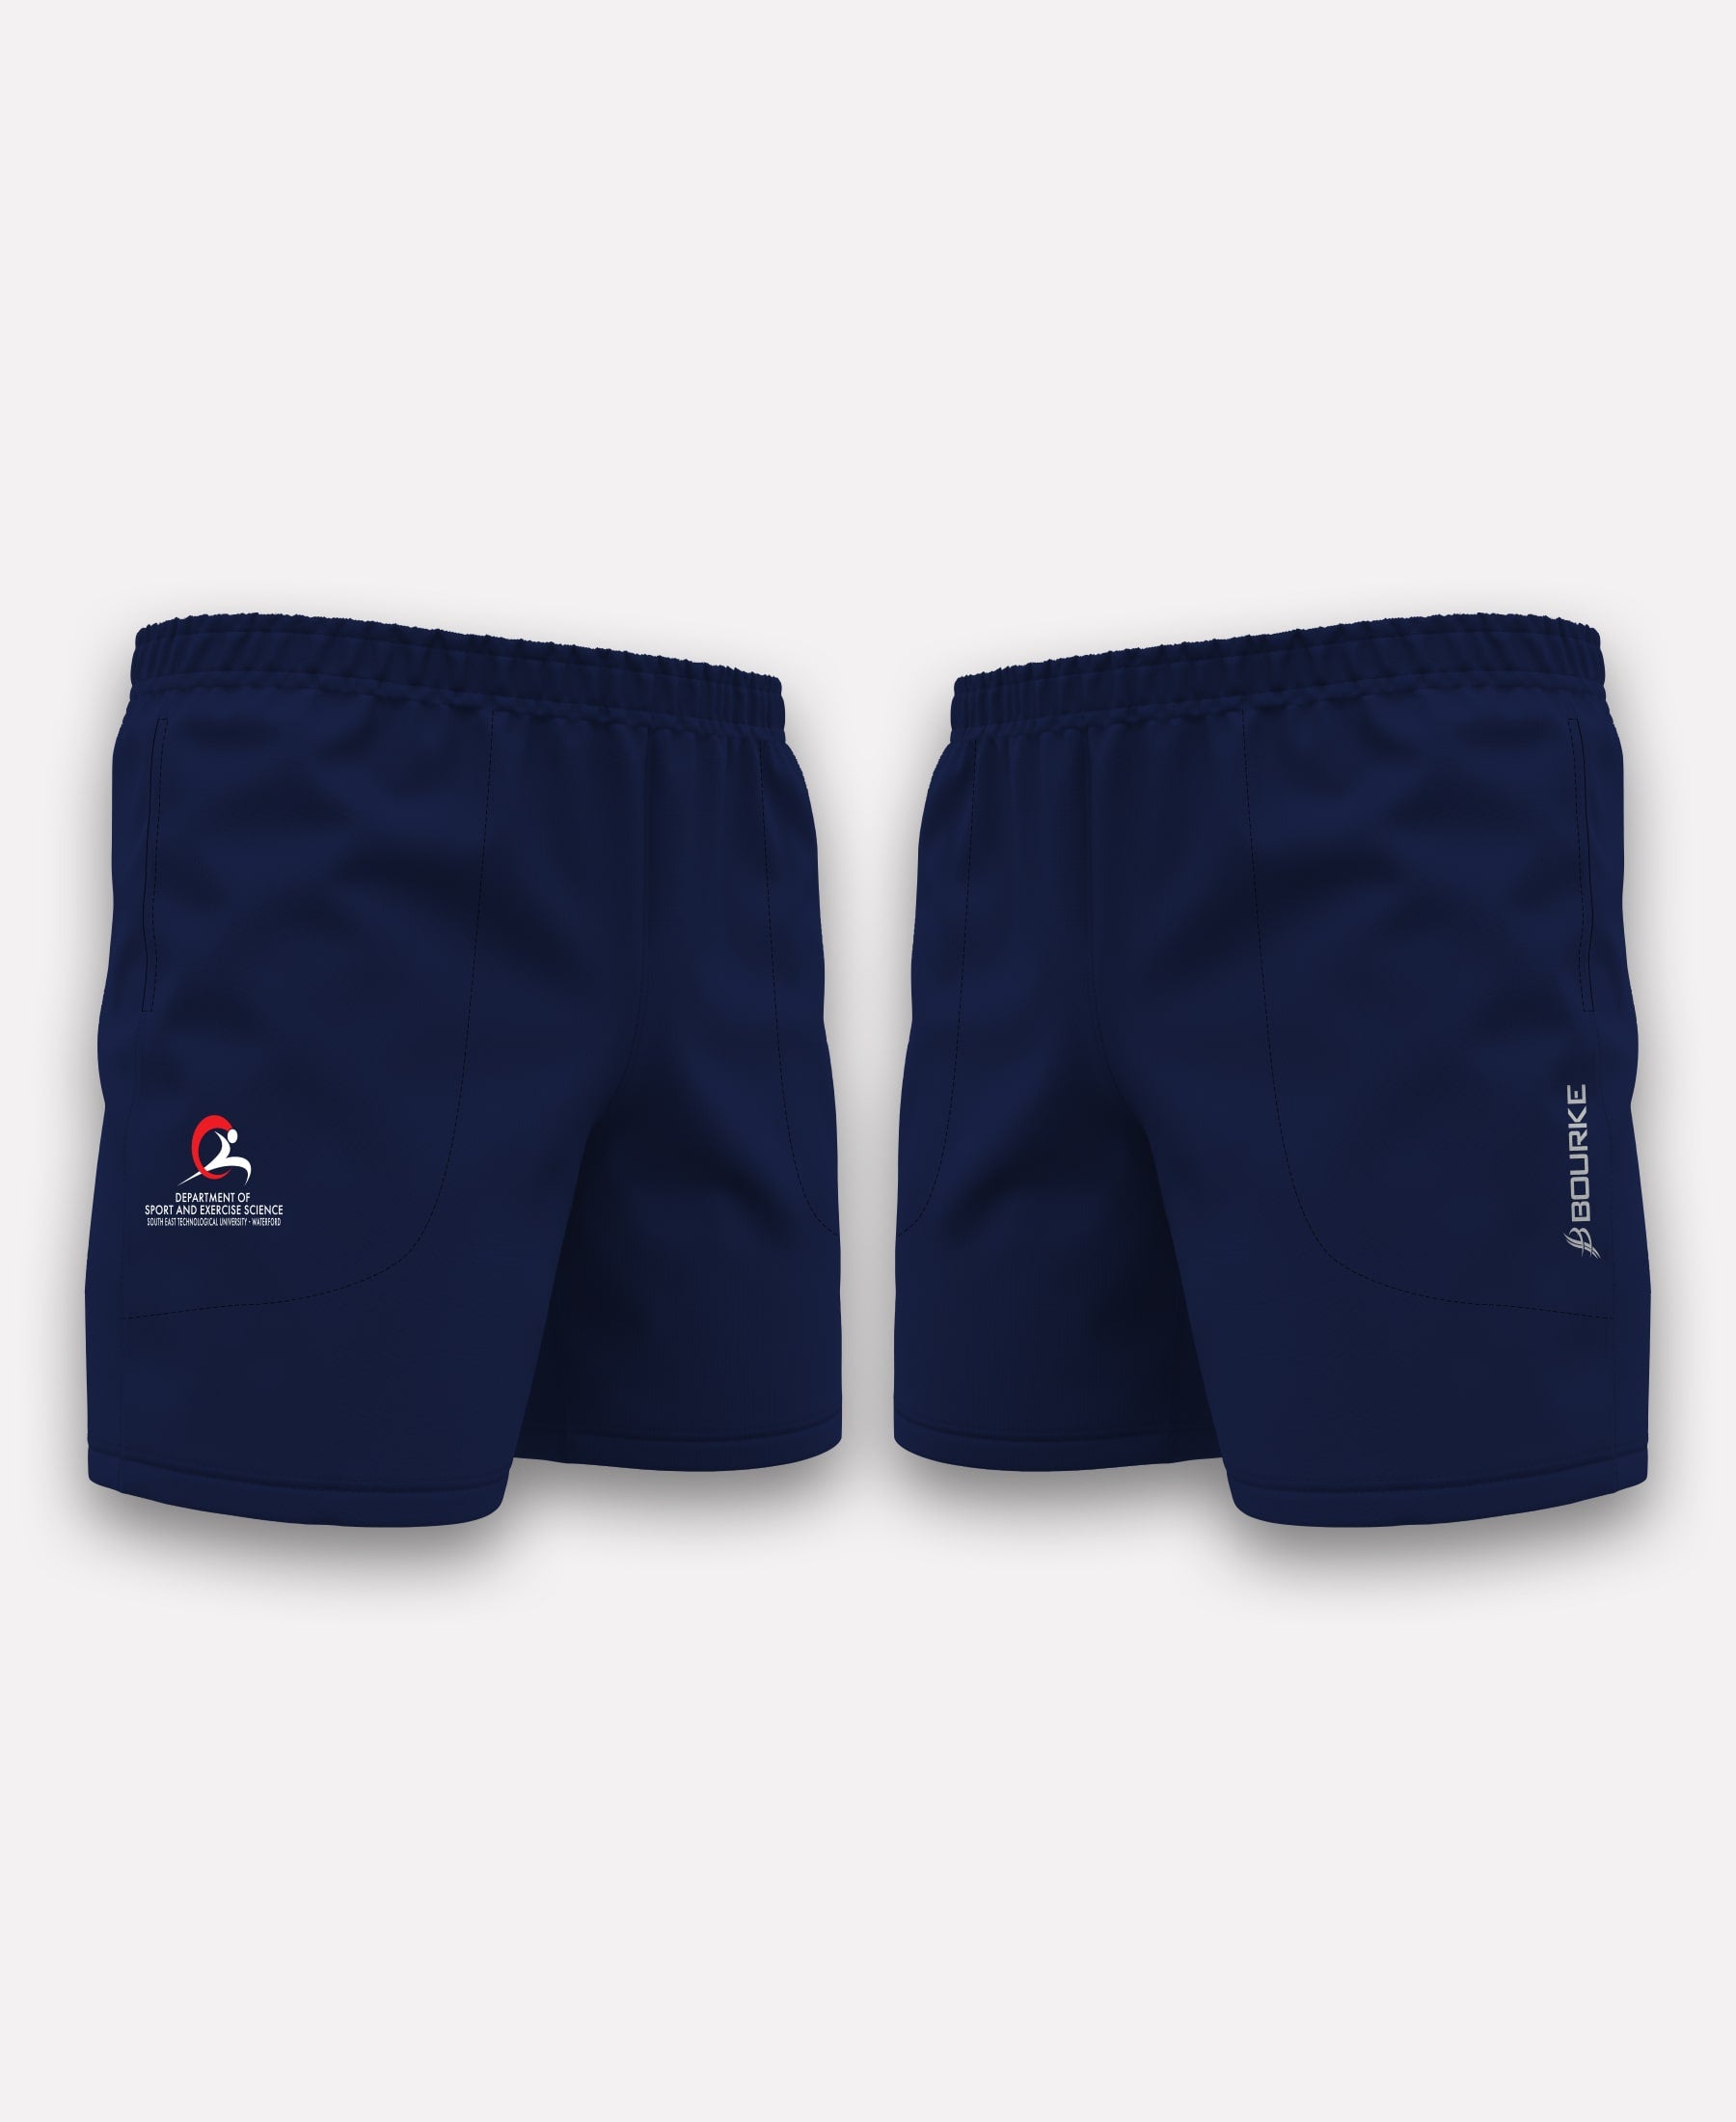 Department of Sport and Exercise Science SETU TACA Gym Shorts (Navy)